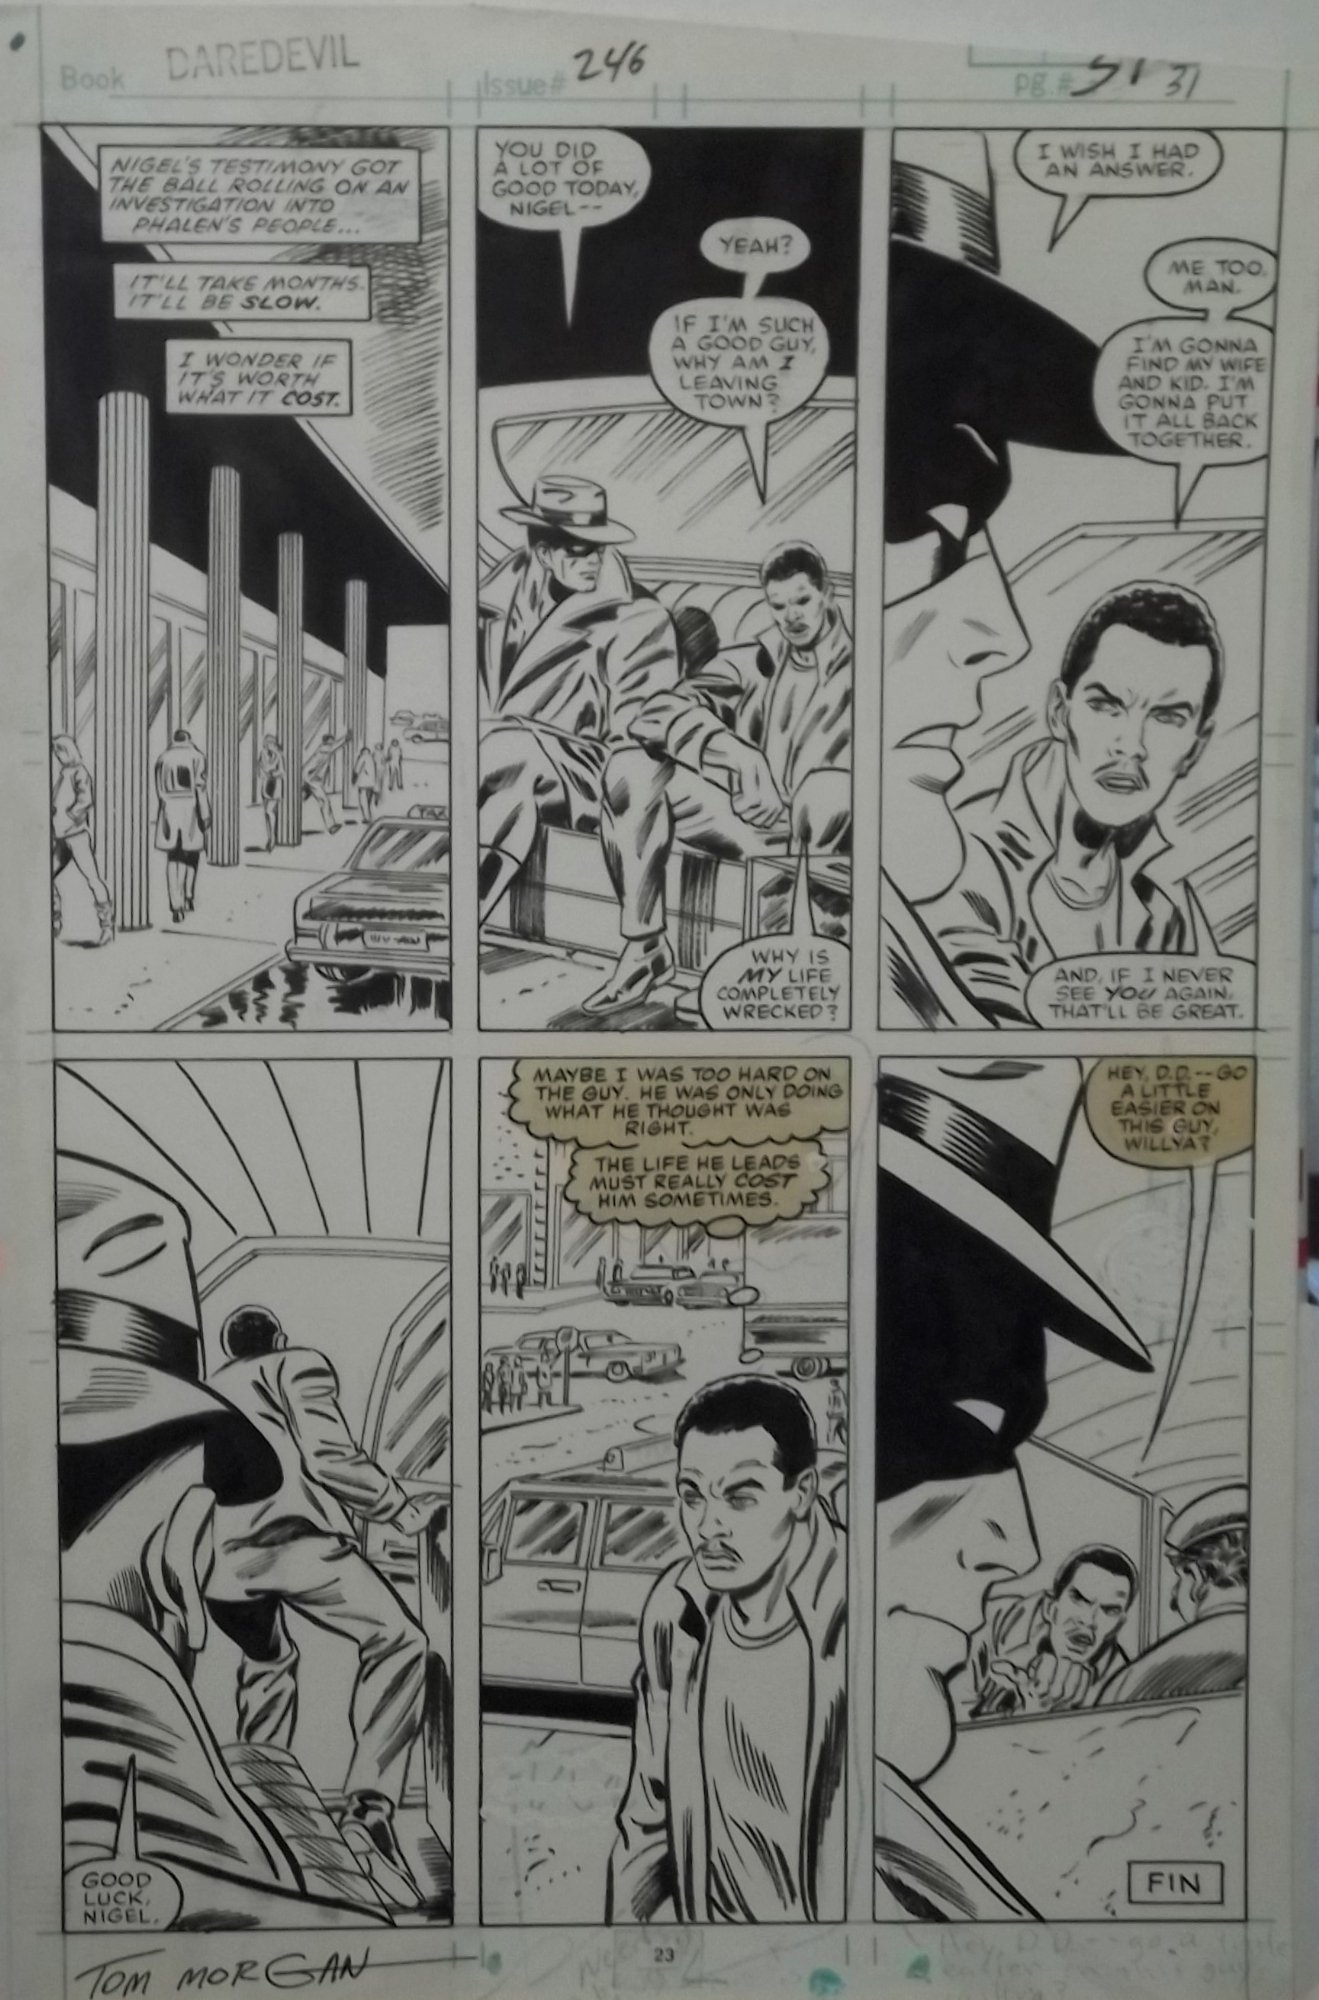 Marvel Daredevil # 246 Page 23 End Page, in Kenneth Gagnon's My Wife's ...